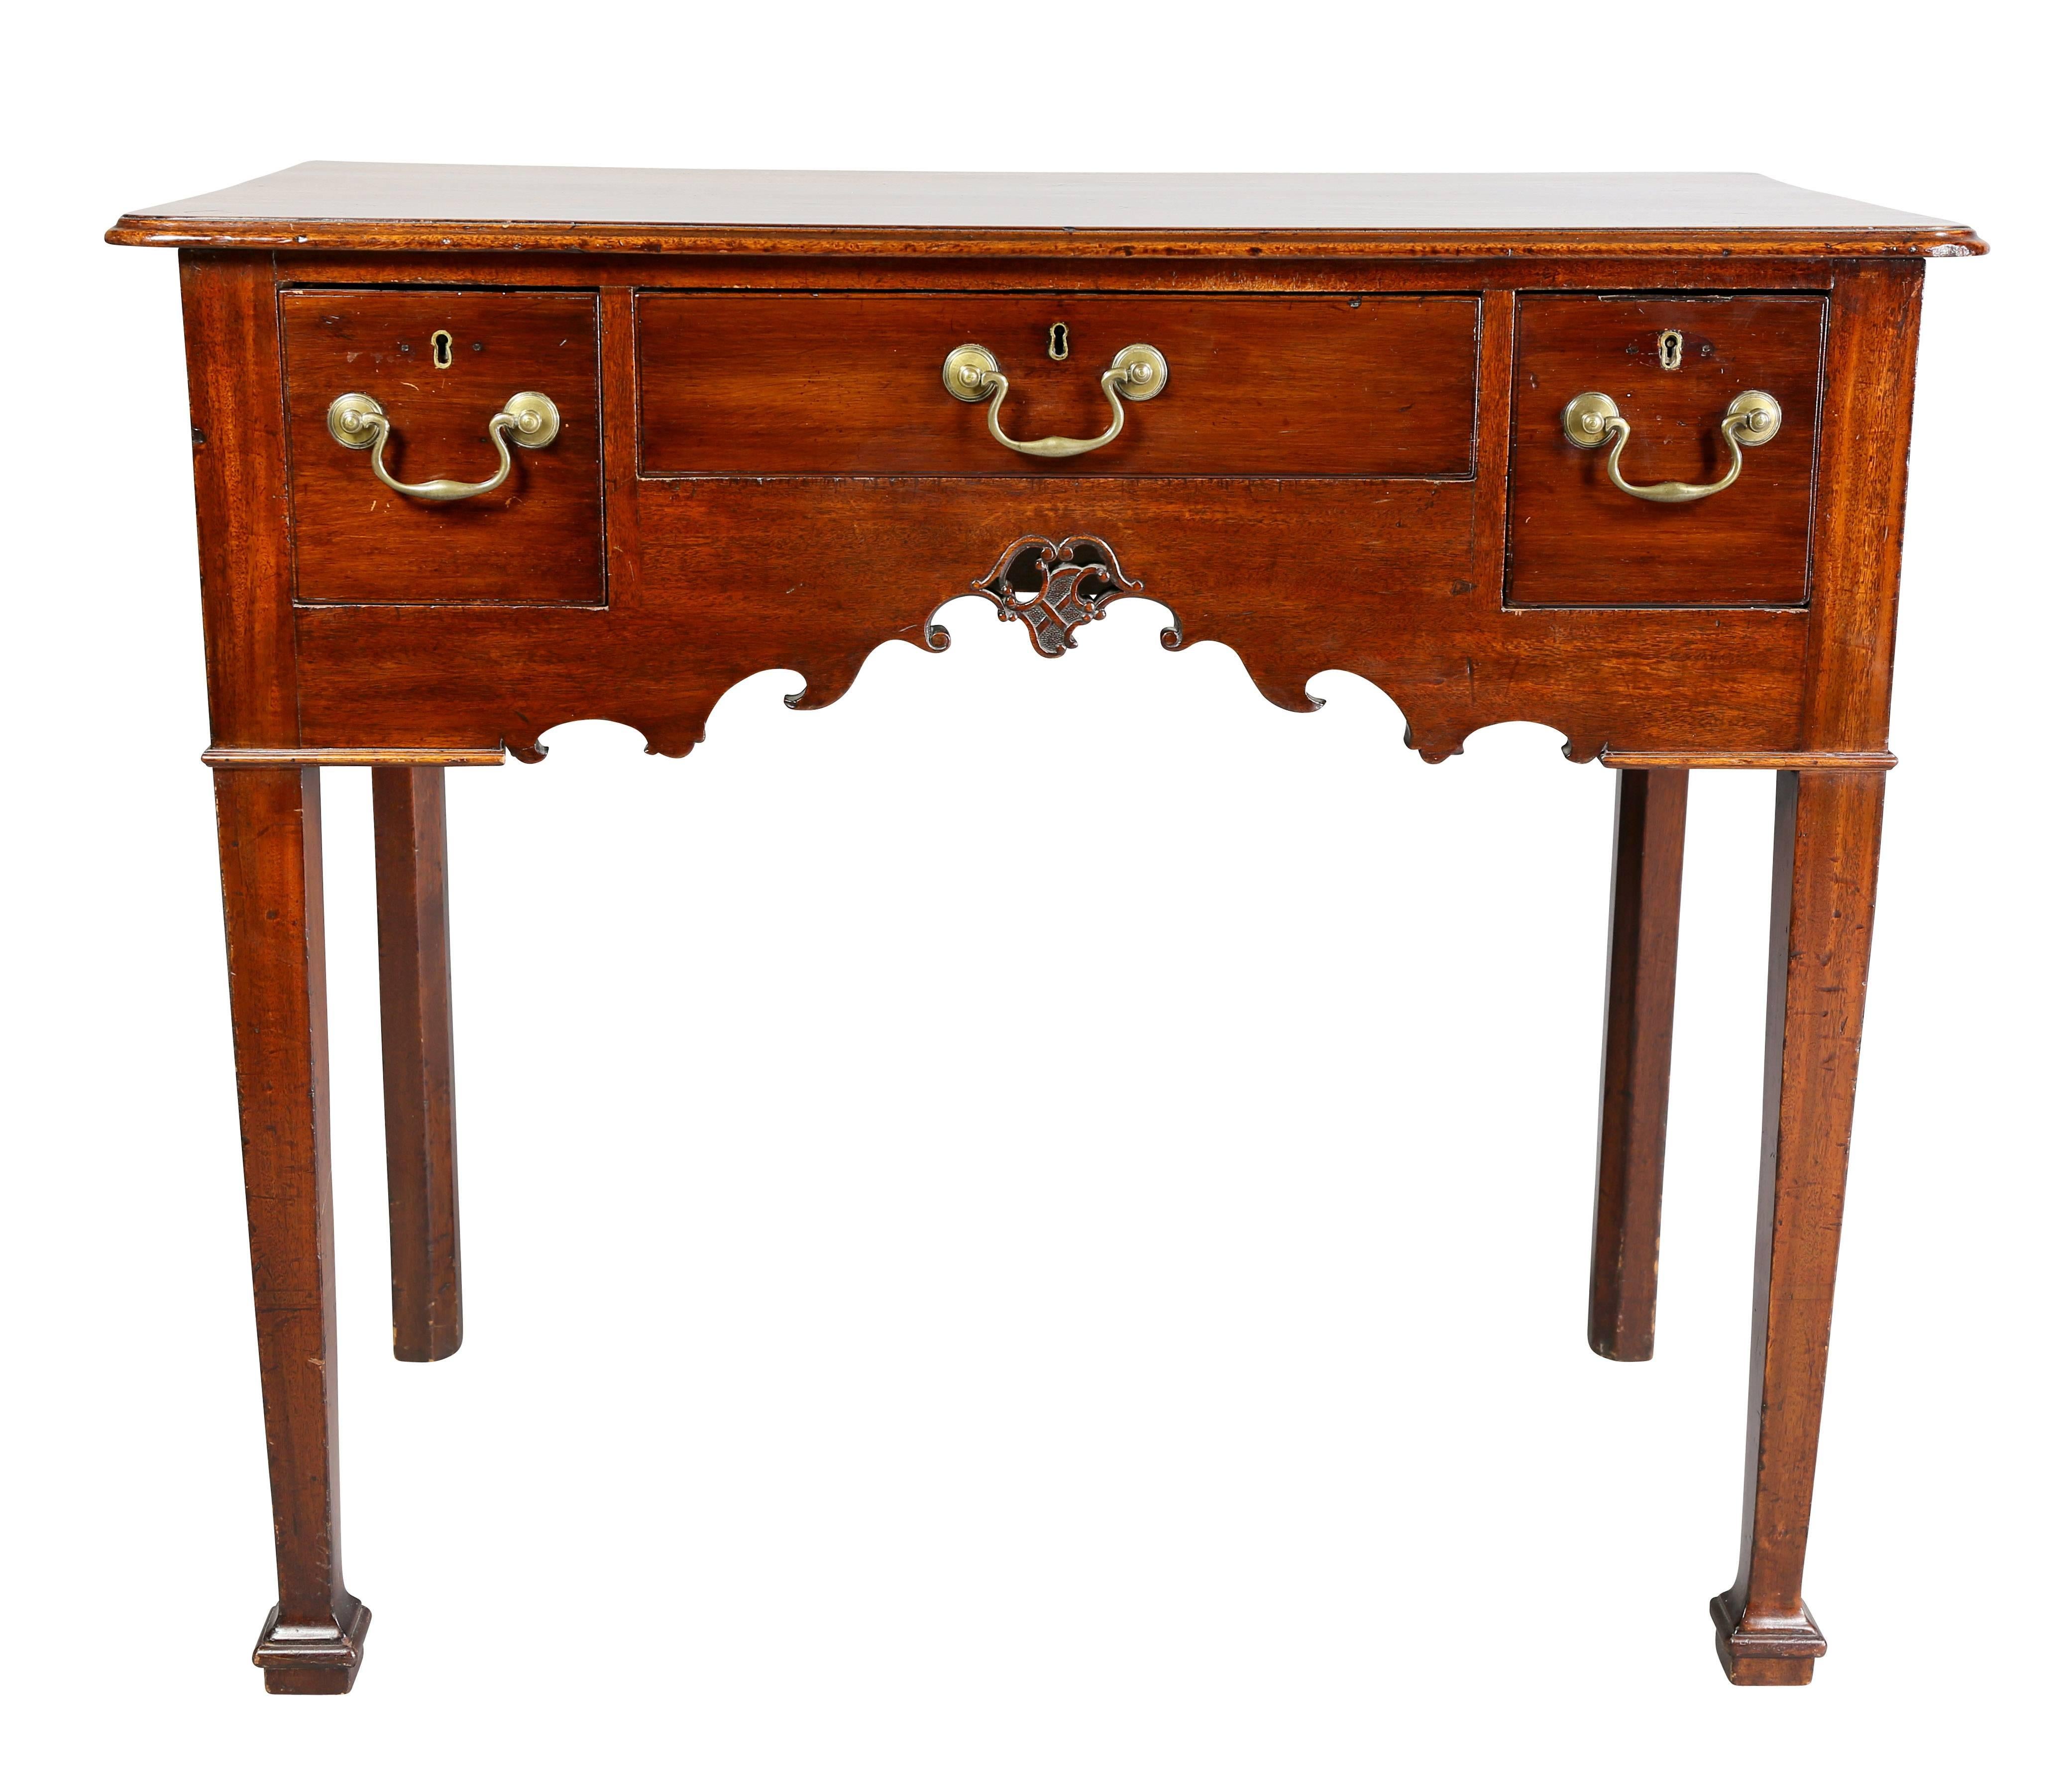 With rectangular top over a long drawer flanked by a single drawer, apron carved with scrolls and central cartouche, raised on square tapered legs, block feet.